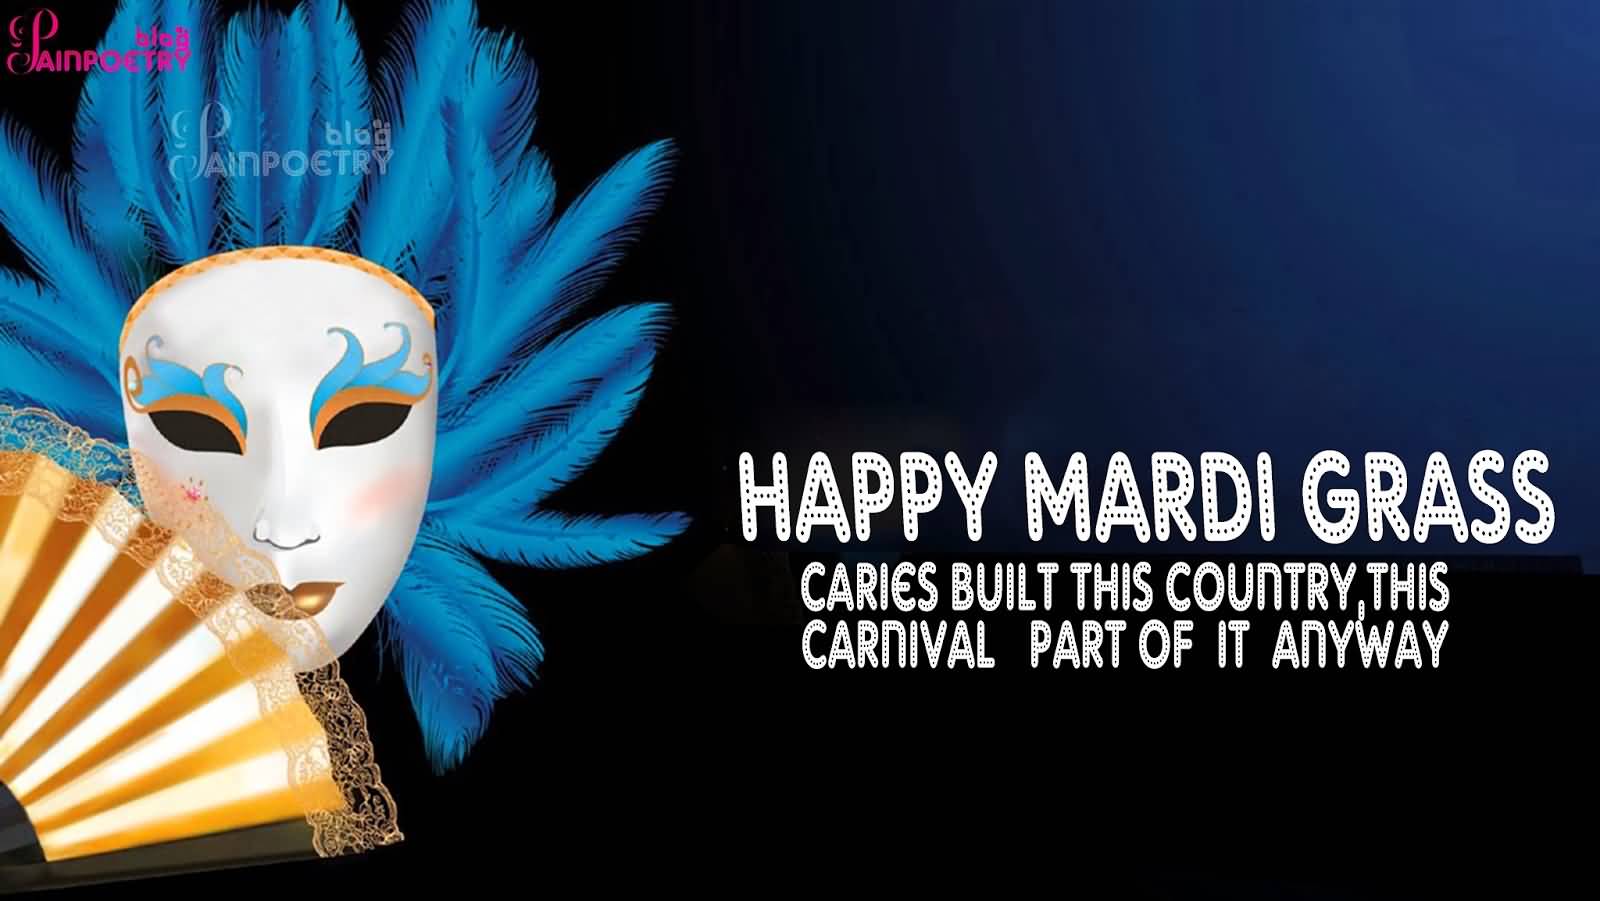 Happy Mardi Gras Caries Built This Country This Carnival Part Of It Anyway